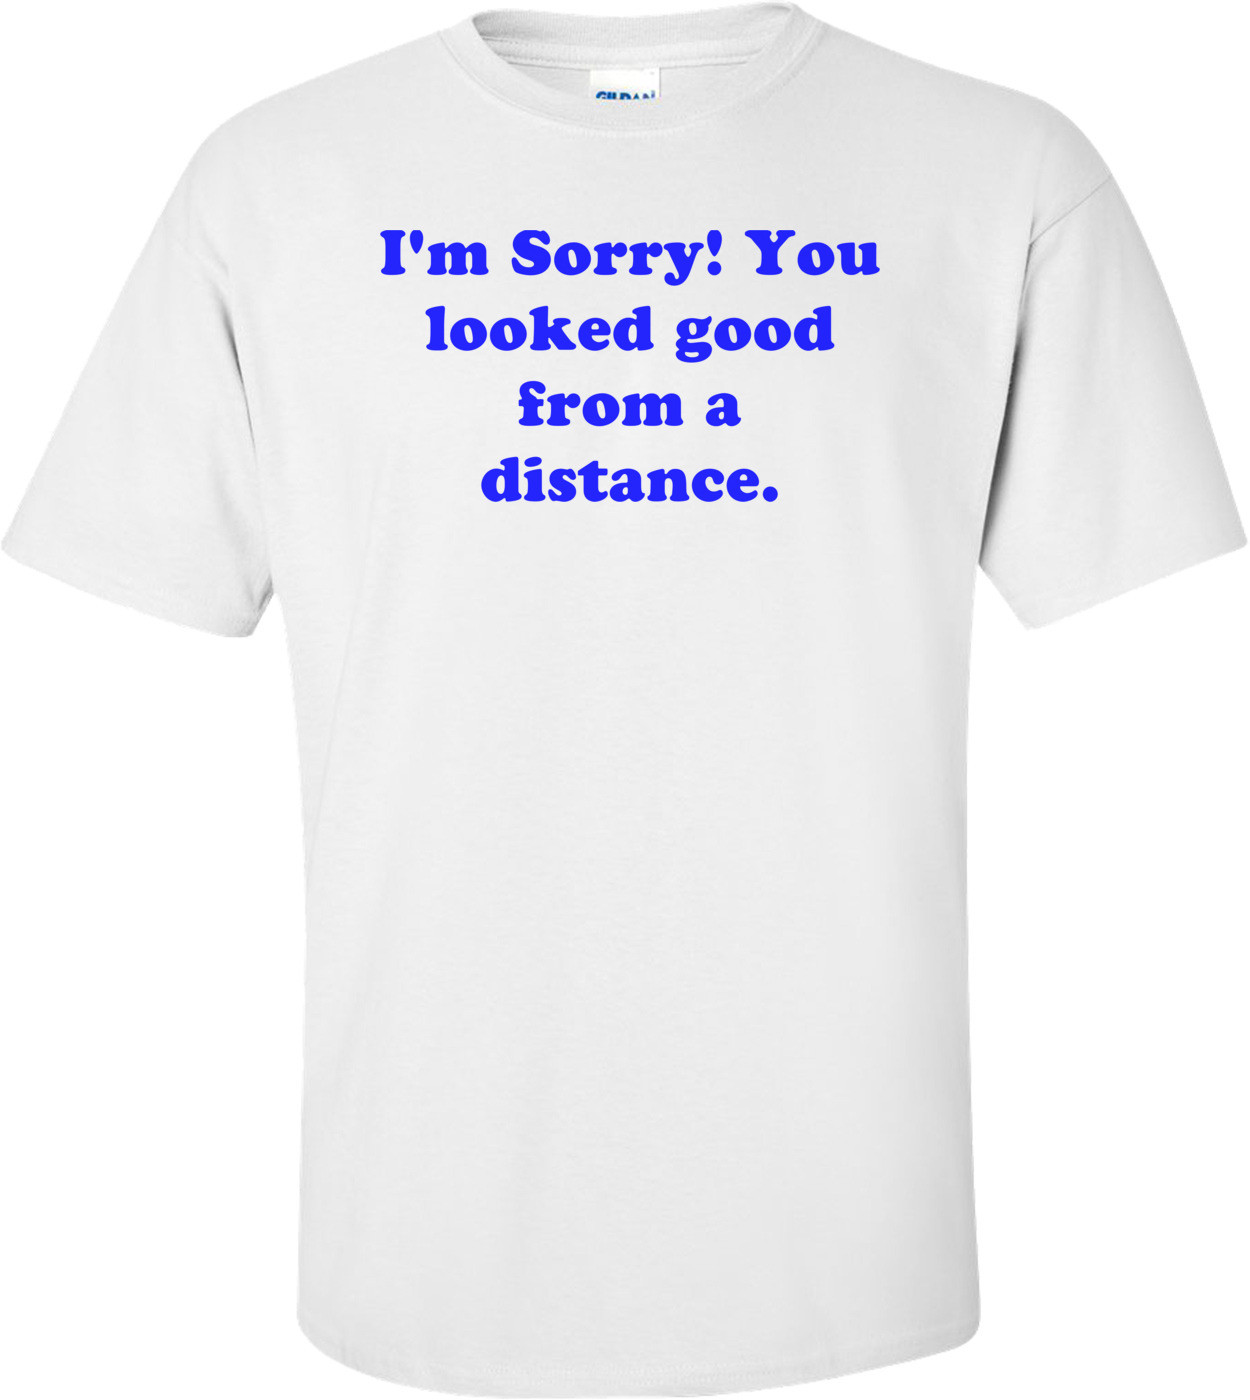 I'm Sorry! You looked good from a distance.